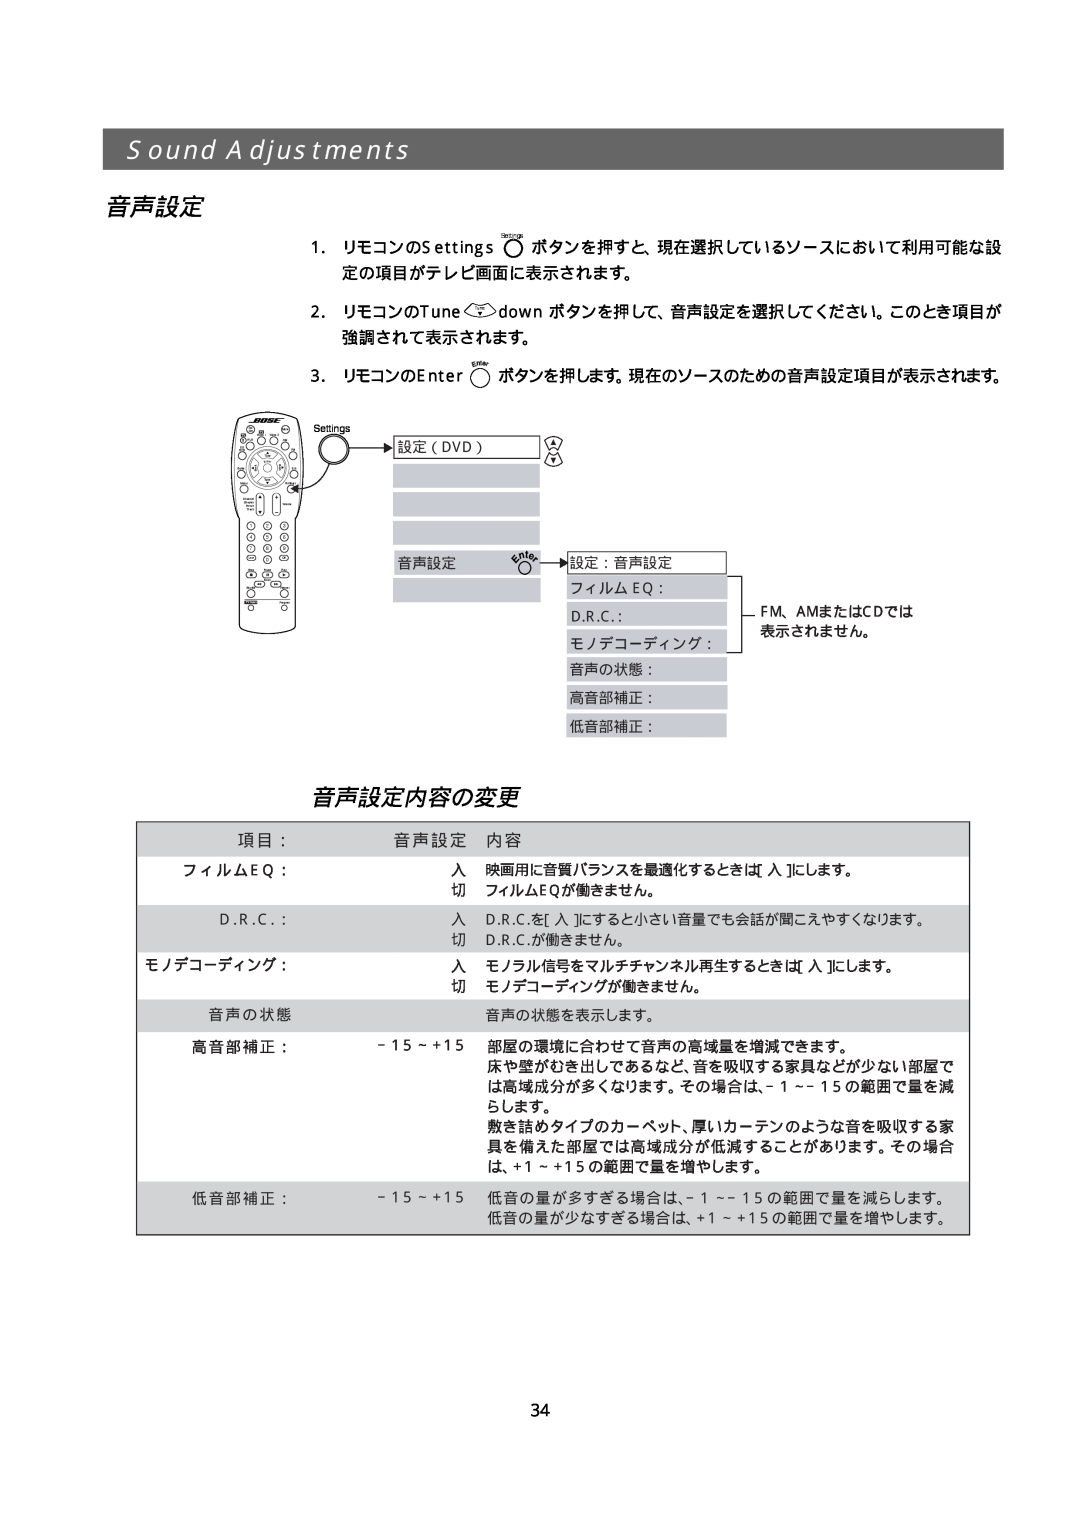 Bose 321GS owner manual Sound Adjustments, 音声設定内容の変更 